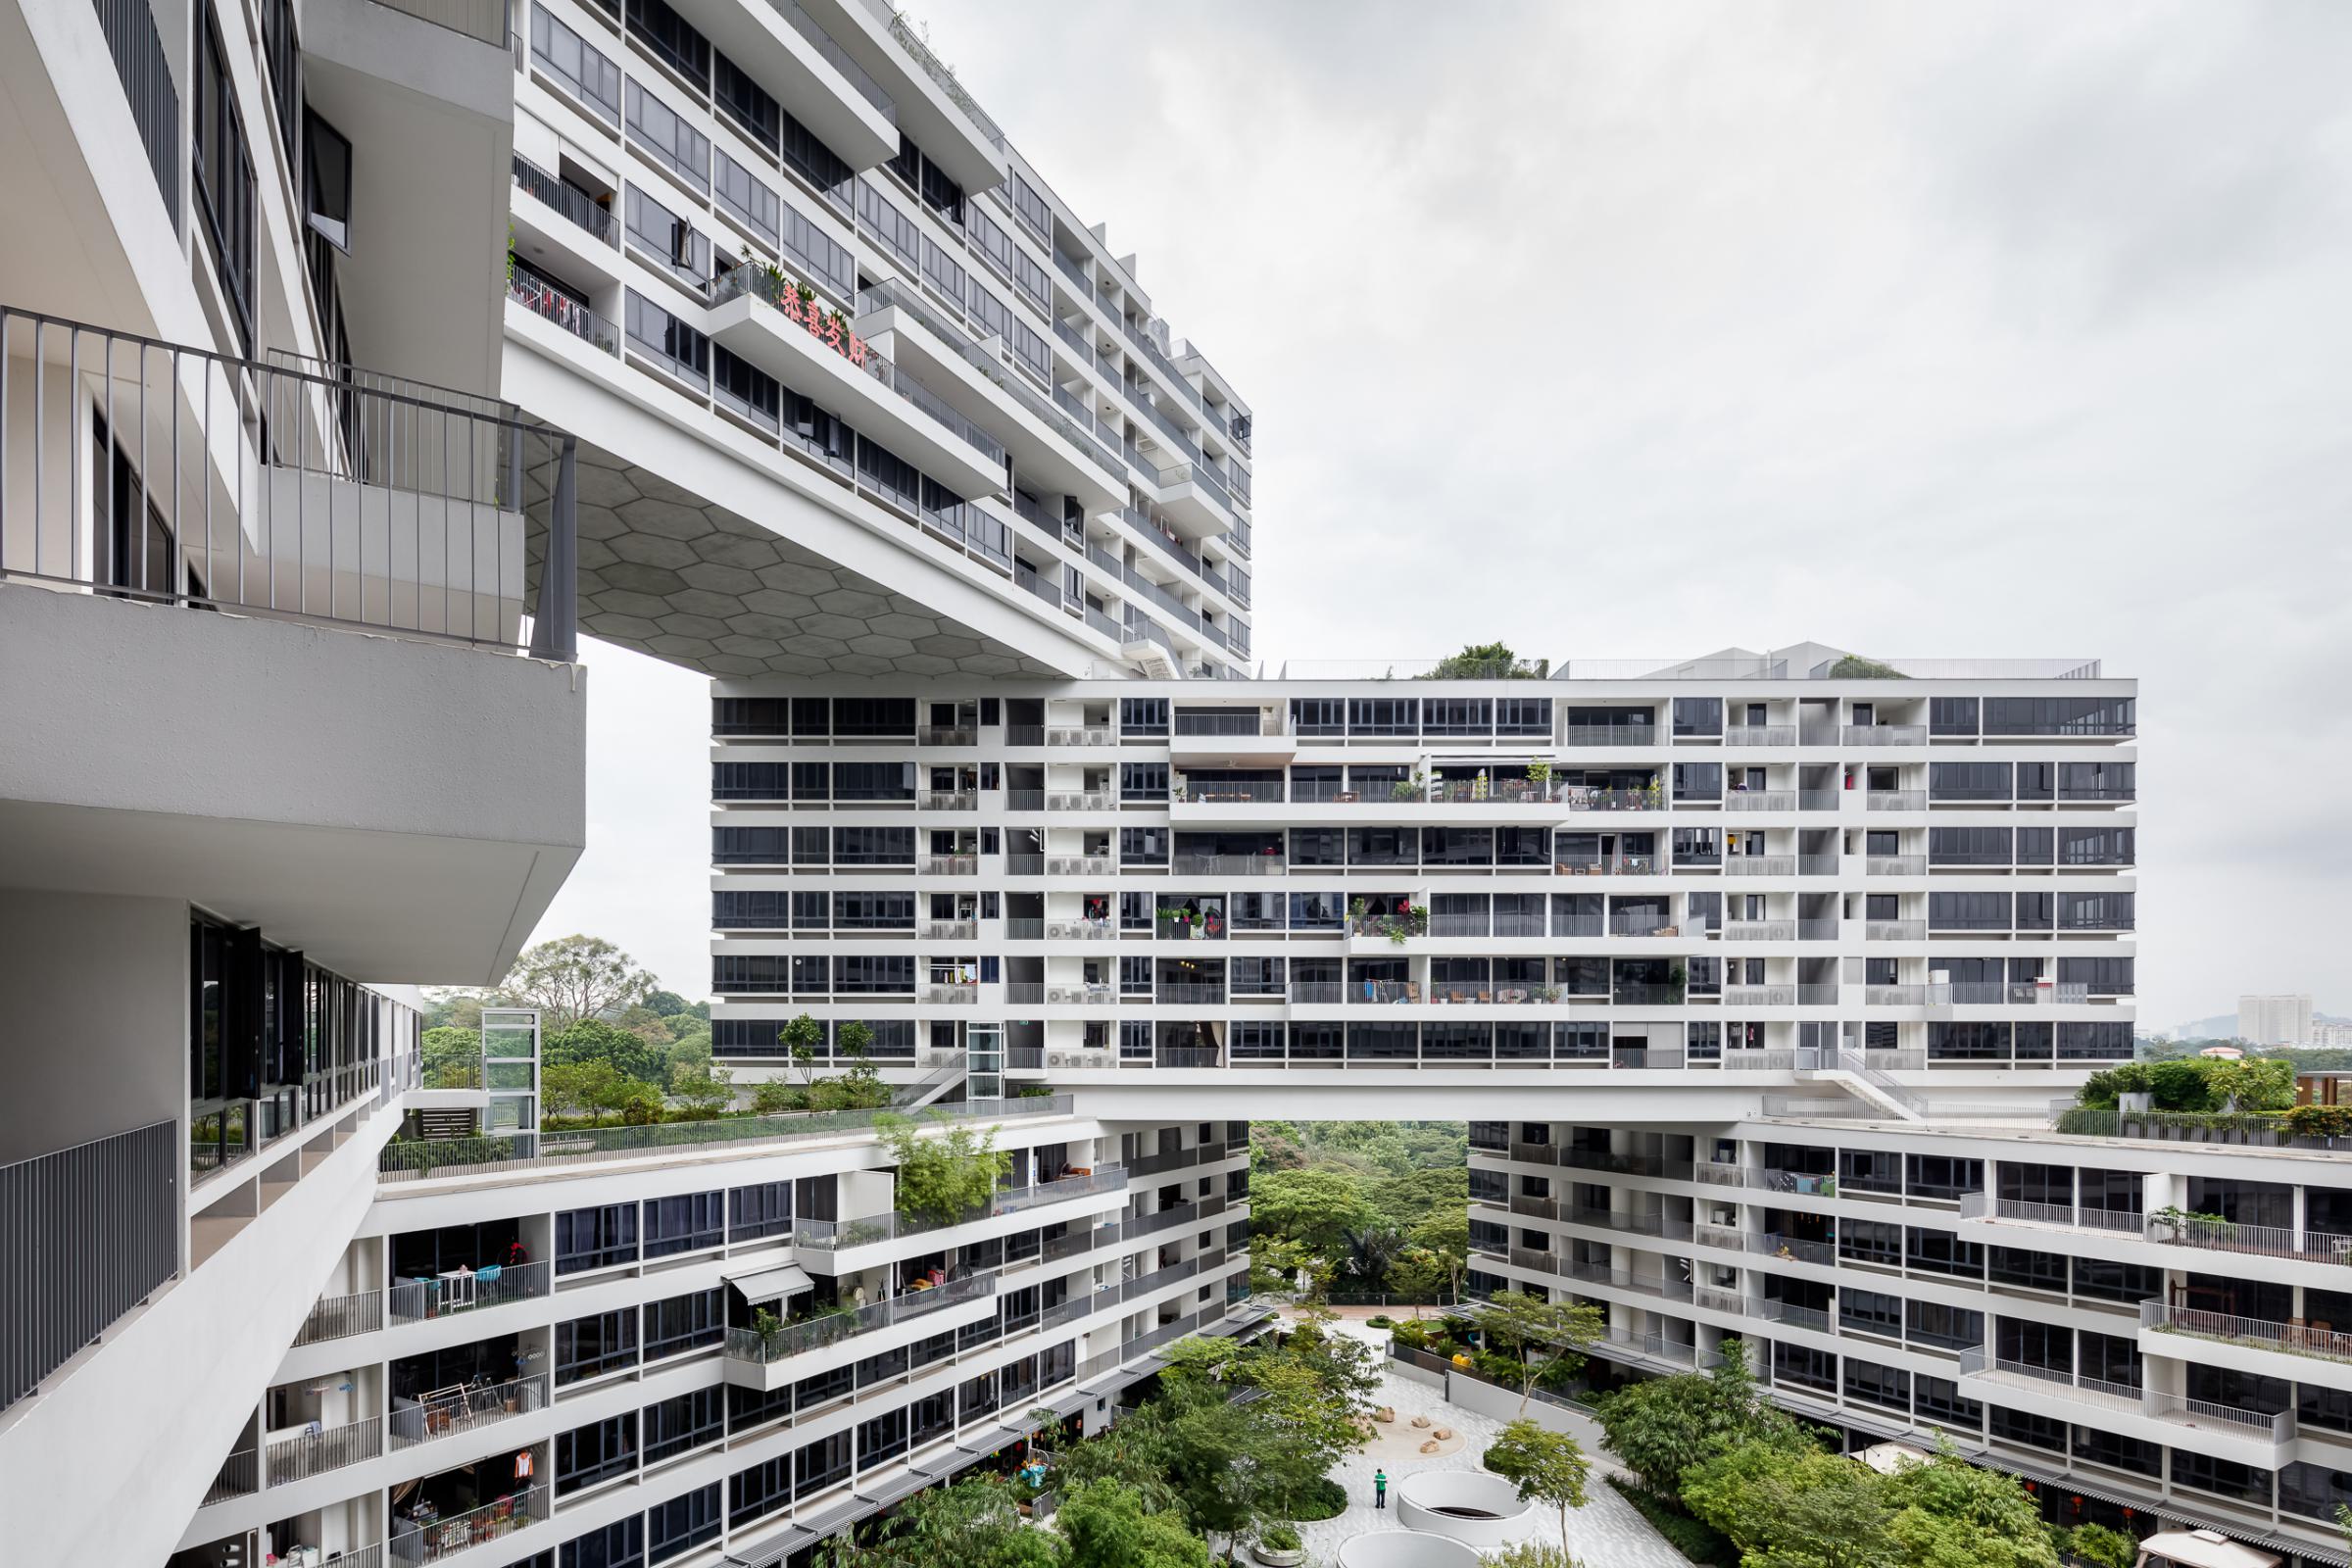 Photograph of The Interlace, designed by OMA / Ole Scheeren and located in Singapore